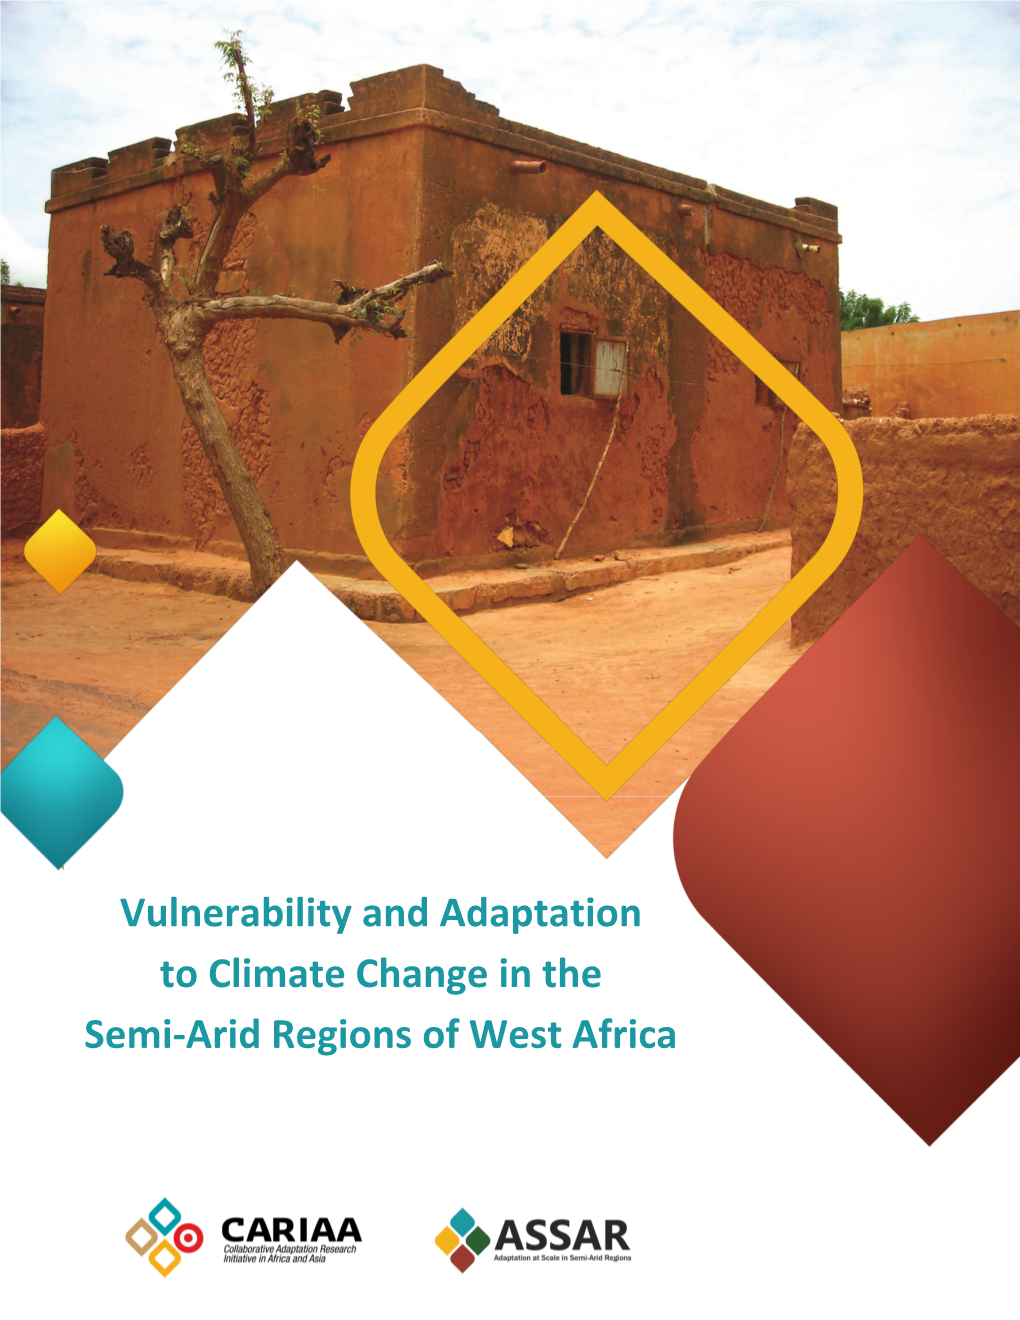 Vulnerability and Adaptation to Climate Change in the Semi-Arid